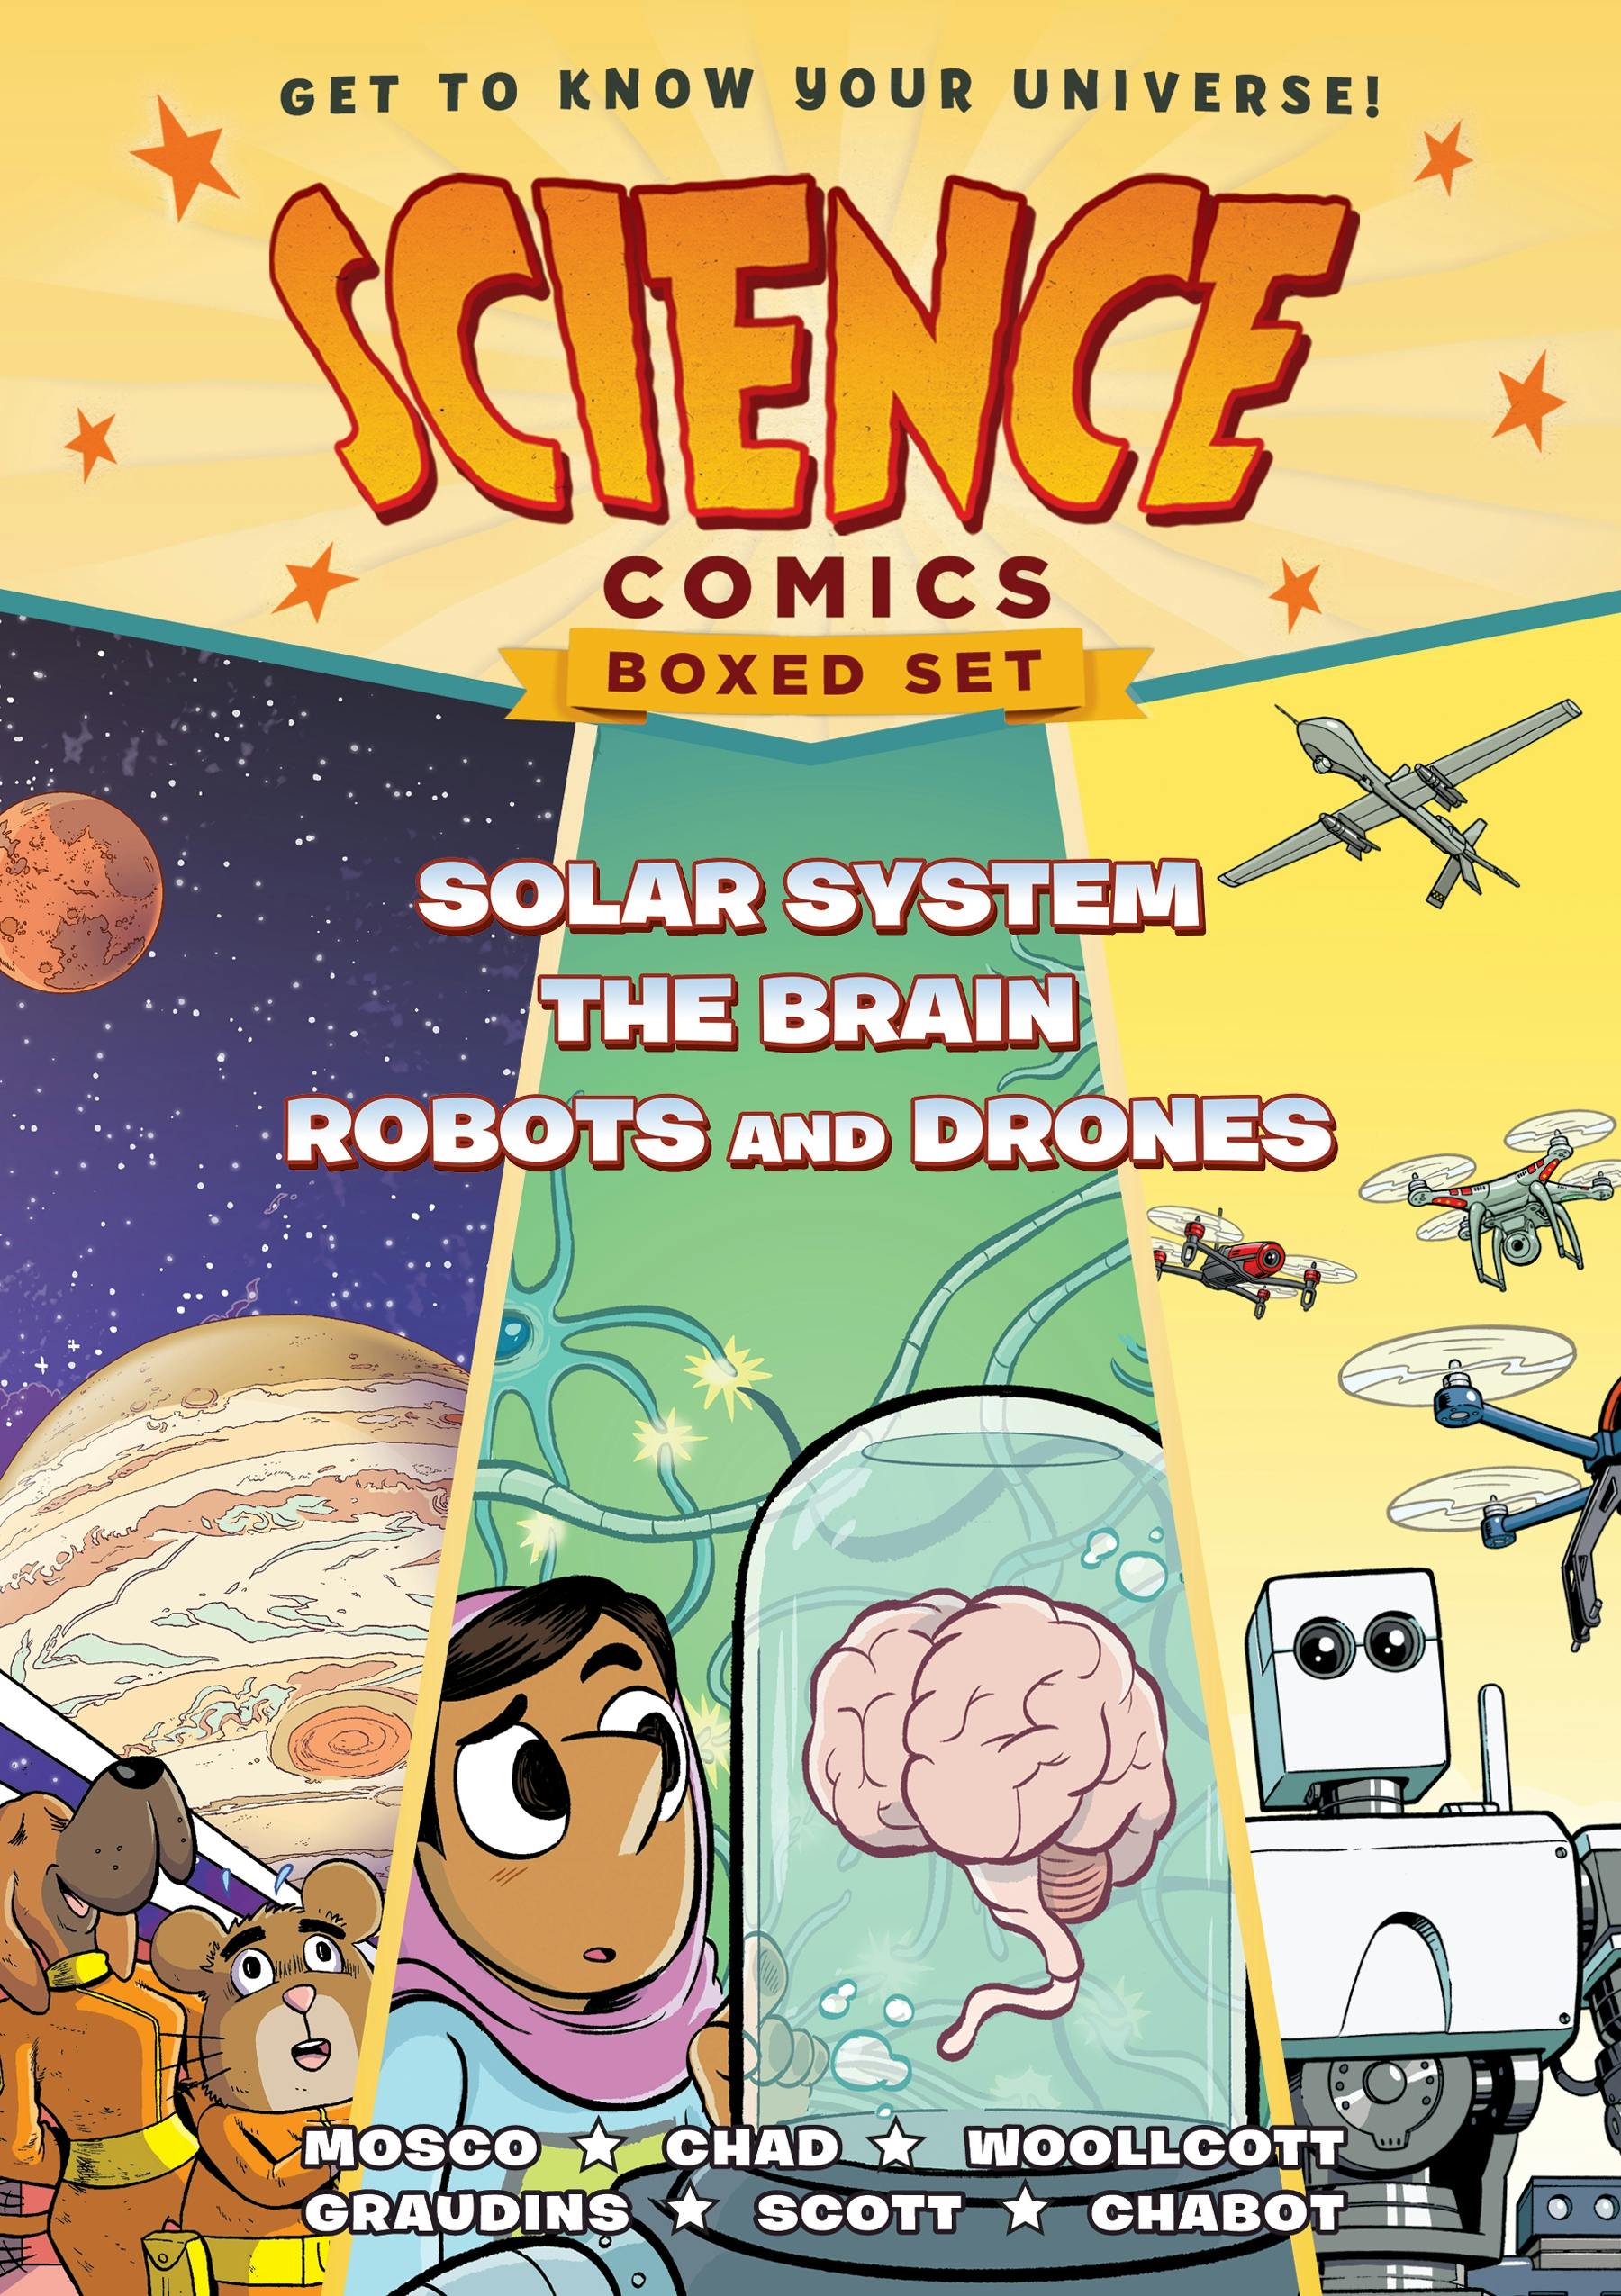 Image of Science Comics Boxed Set: Solar System, The Brain, and Robots and Drones